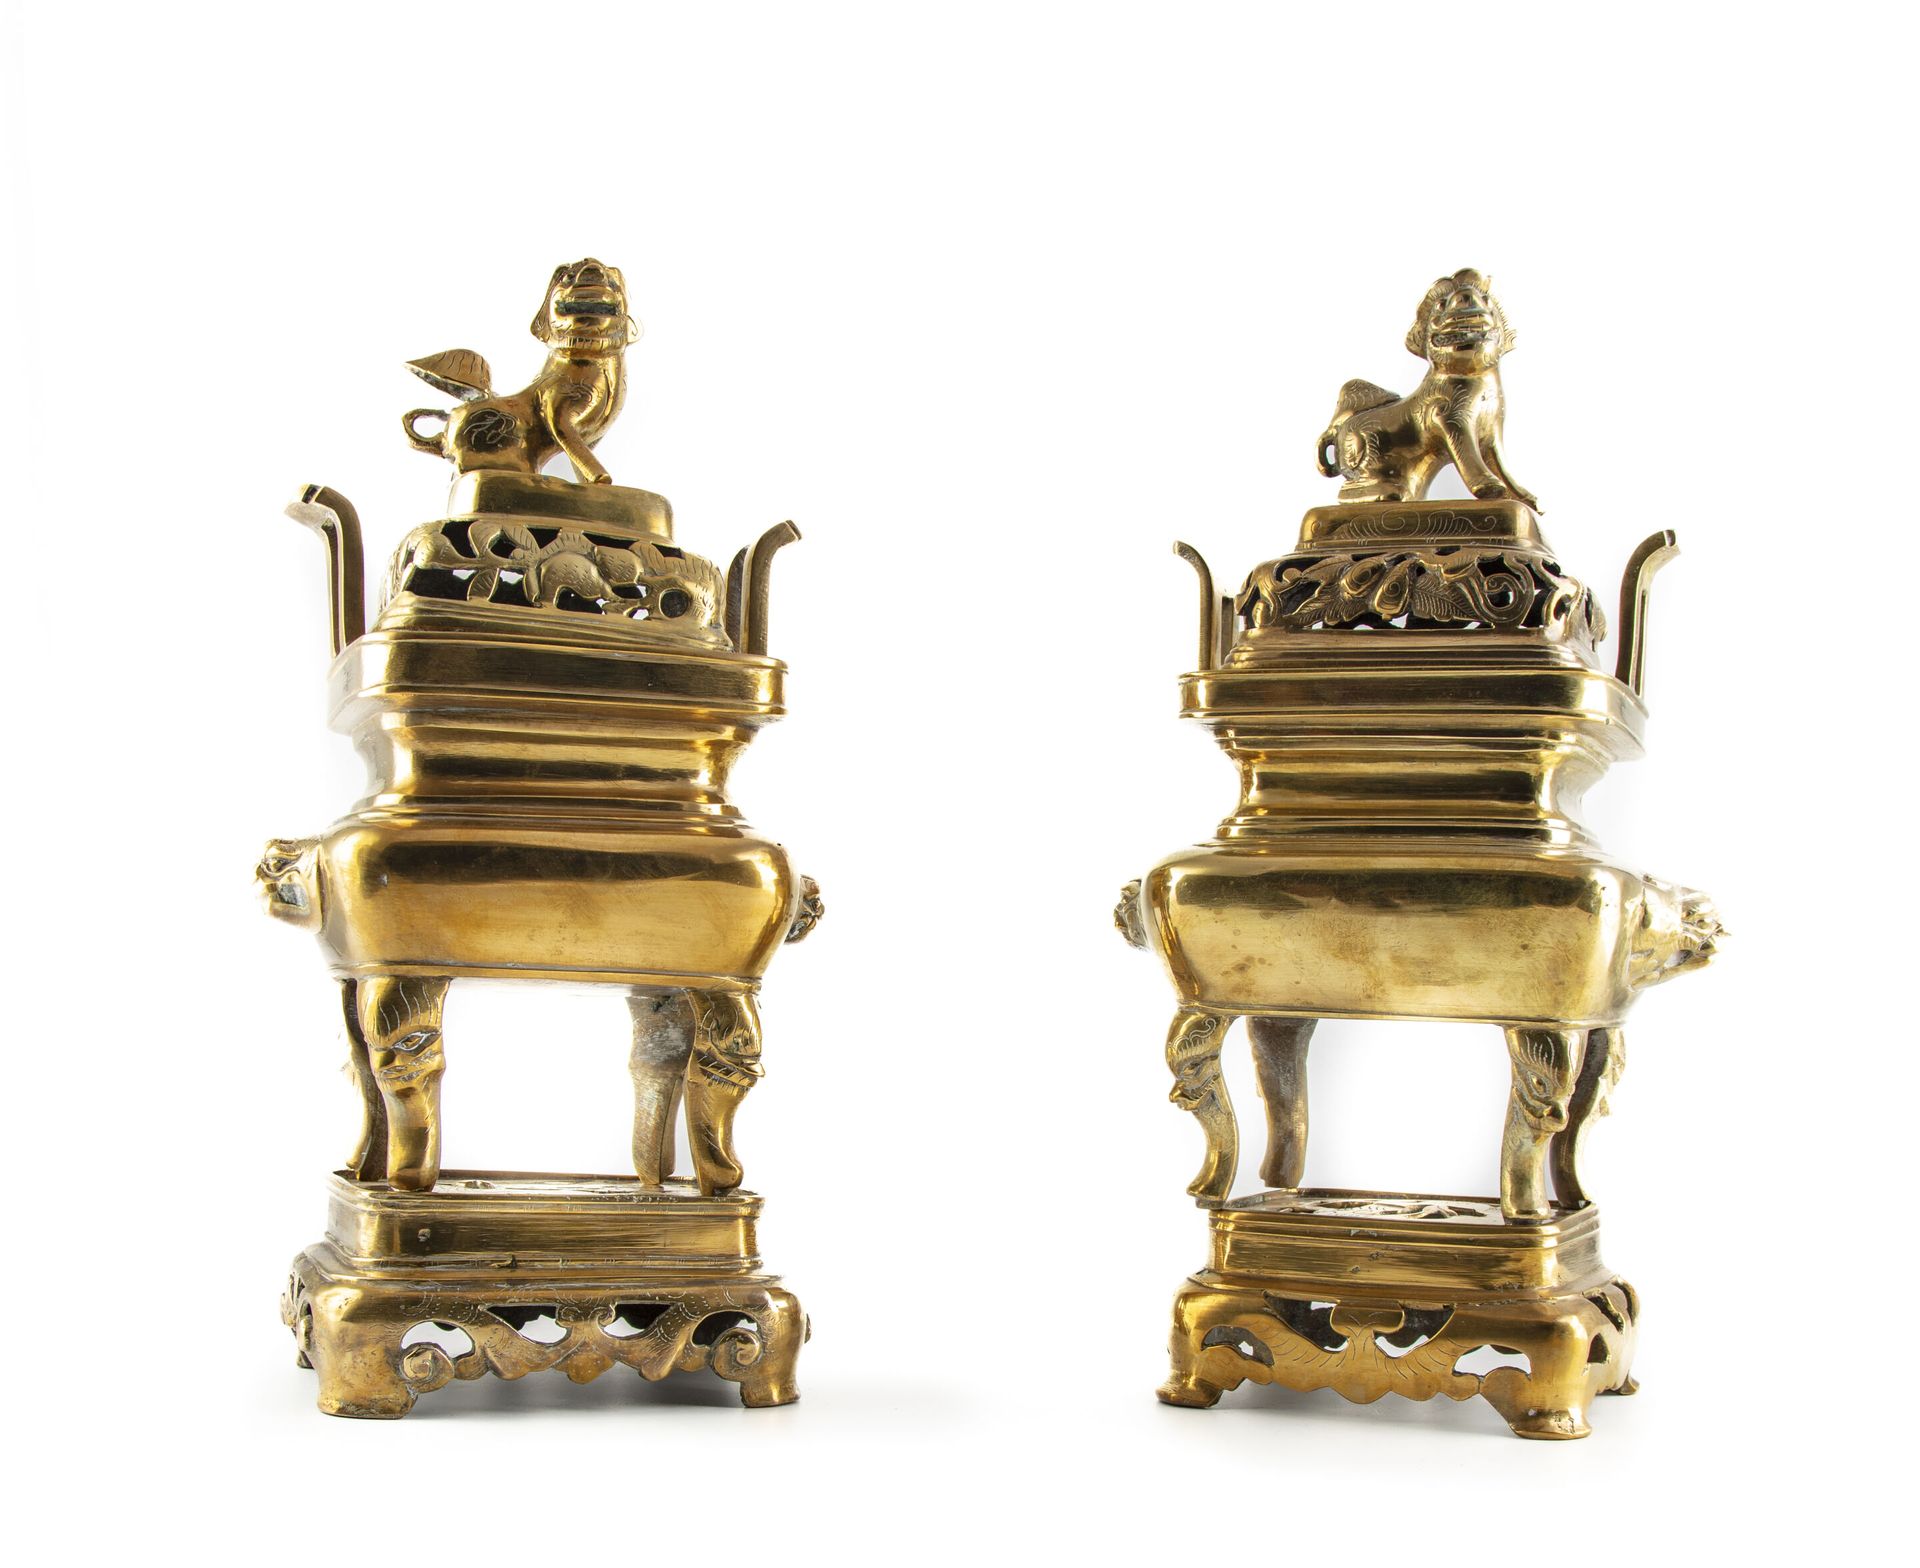 Null INDOCHINA
Pair of gilt bronze candle burners, depatinated
Circa 1900
H. 39 &hellip;